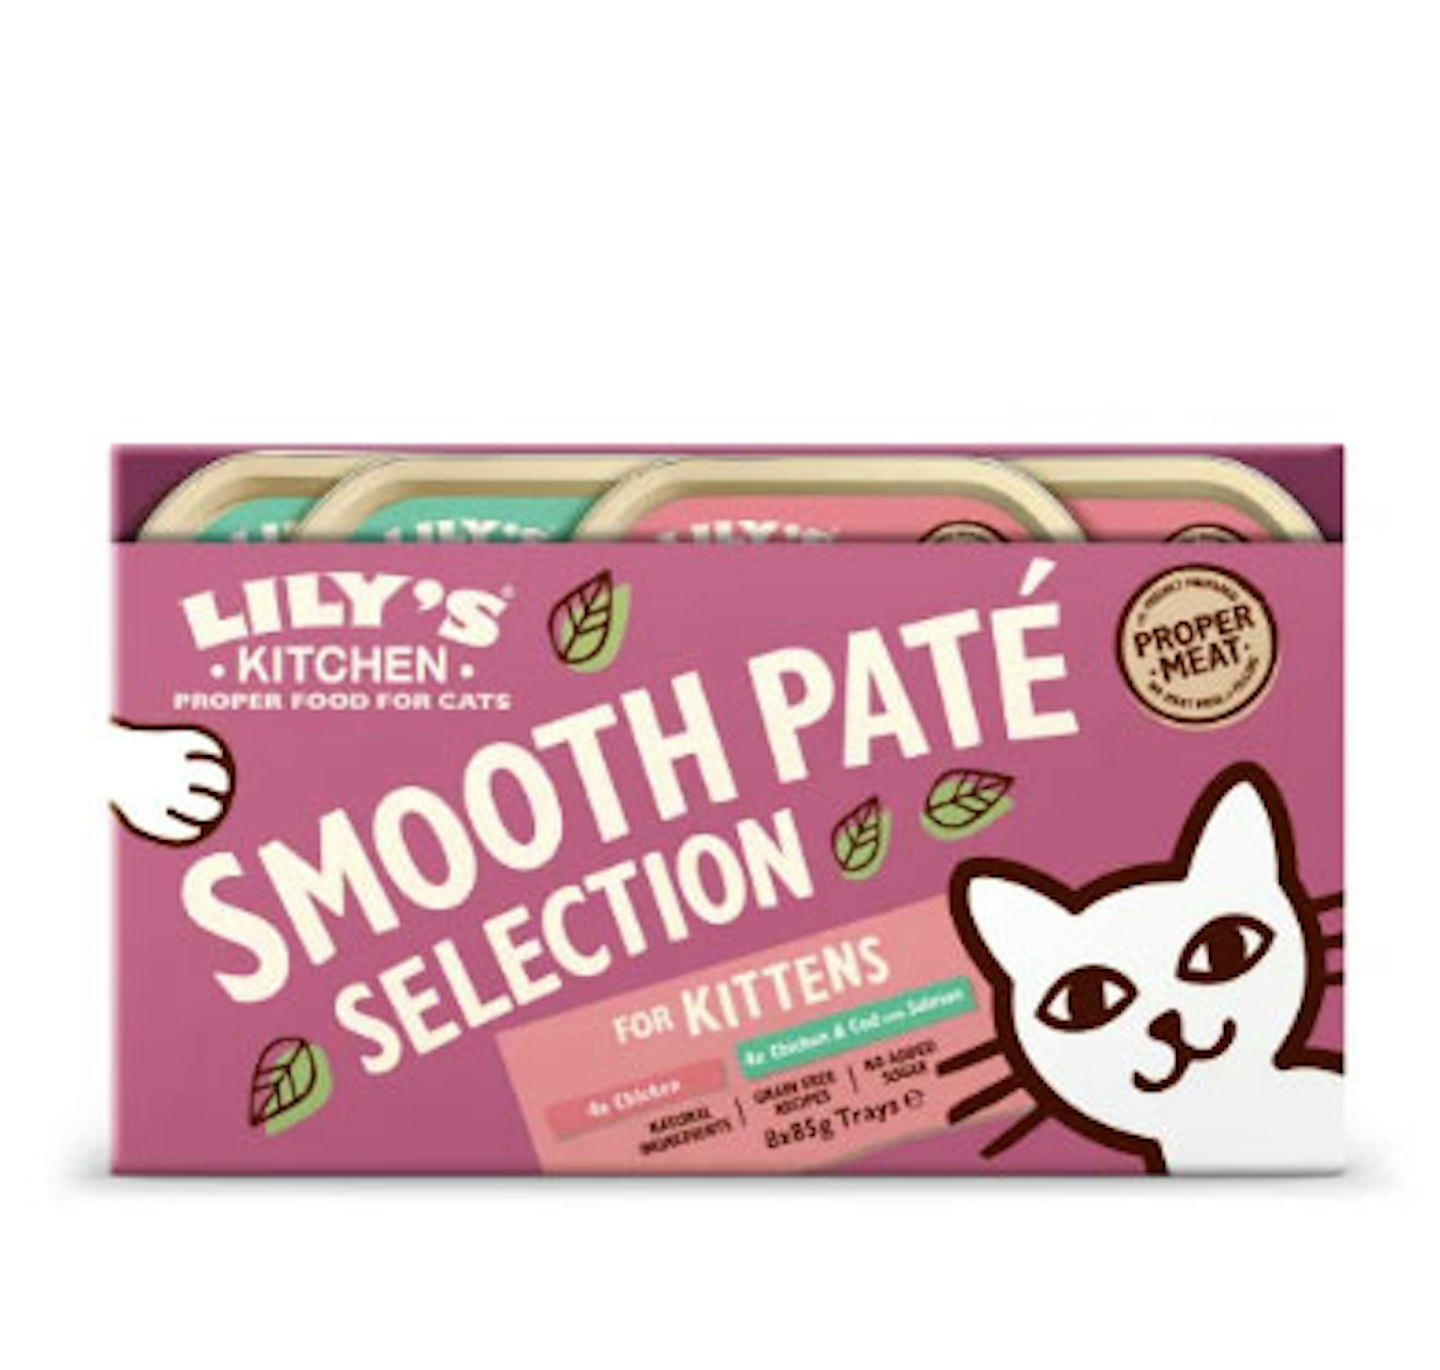 Lily's Kitchen Smooth Paté Selection Complete Kitten Food